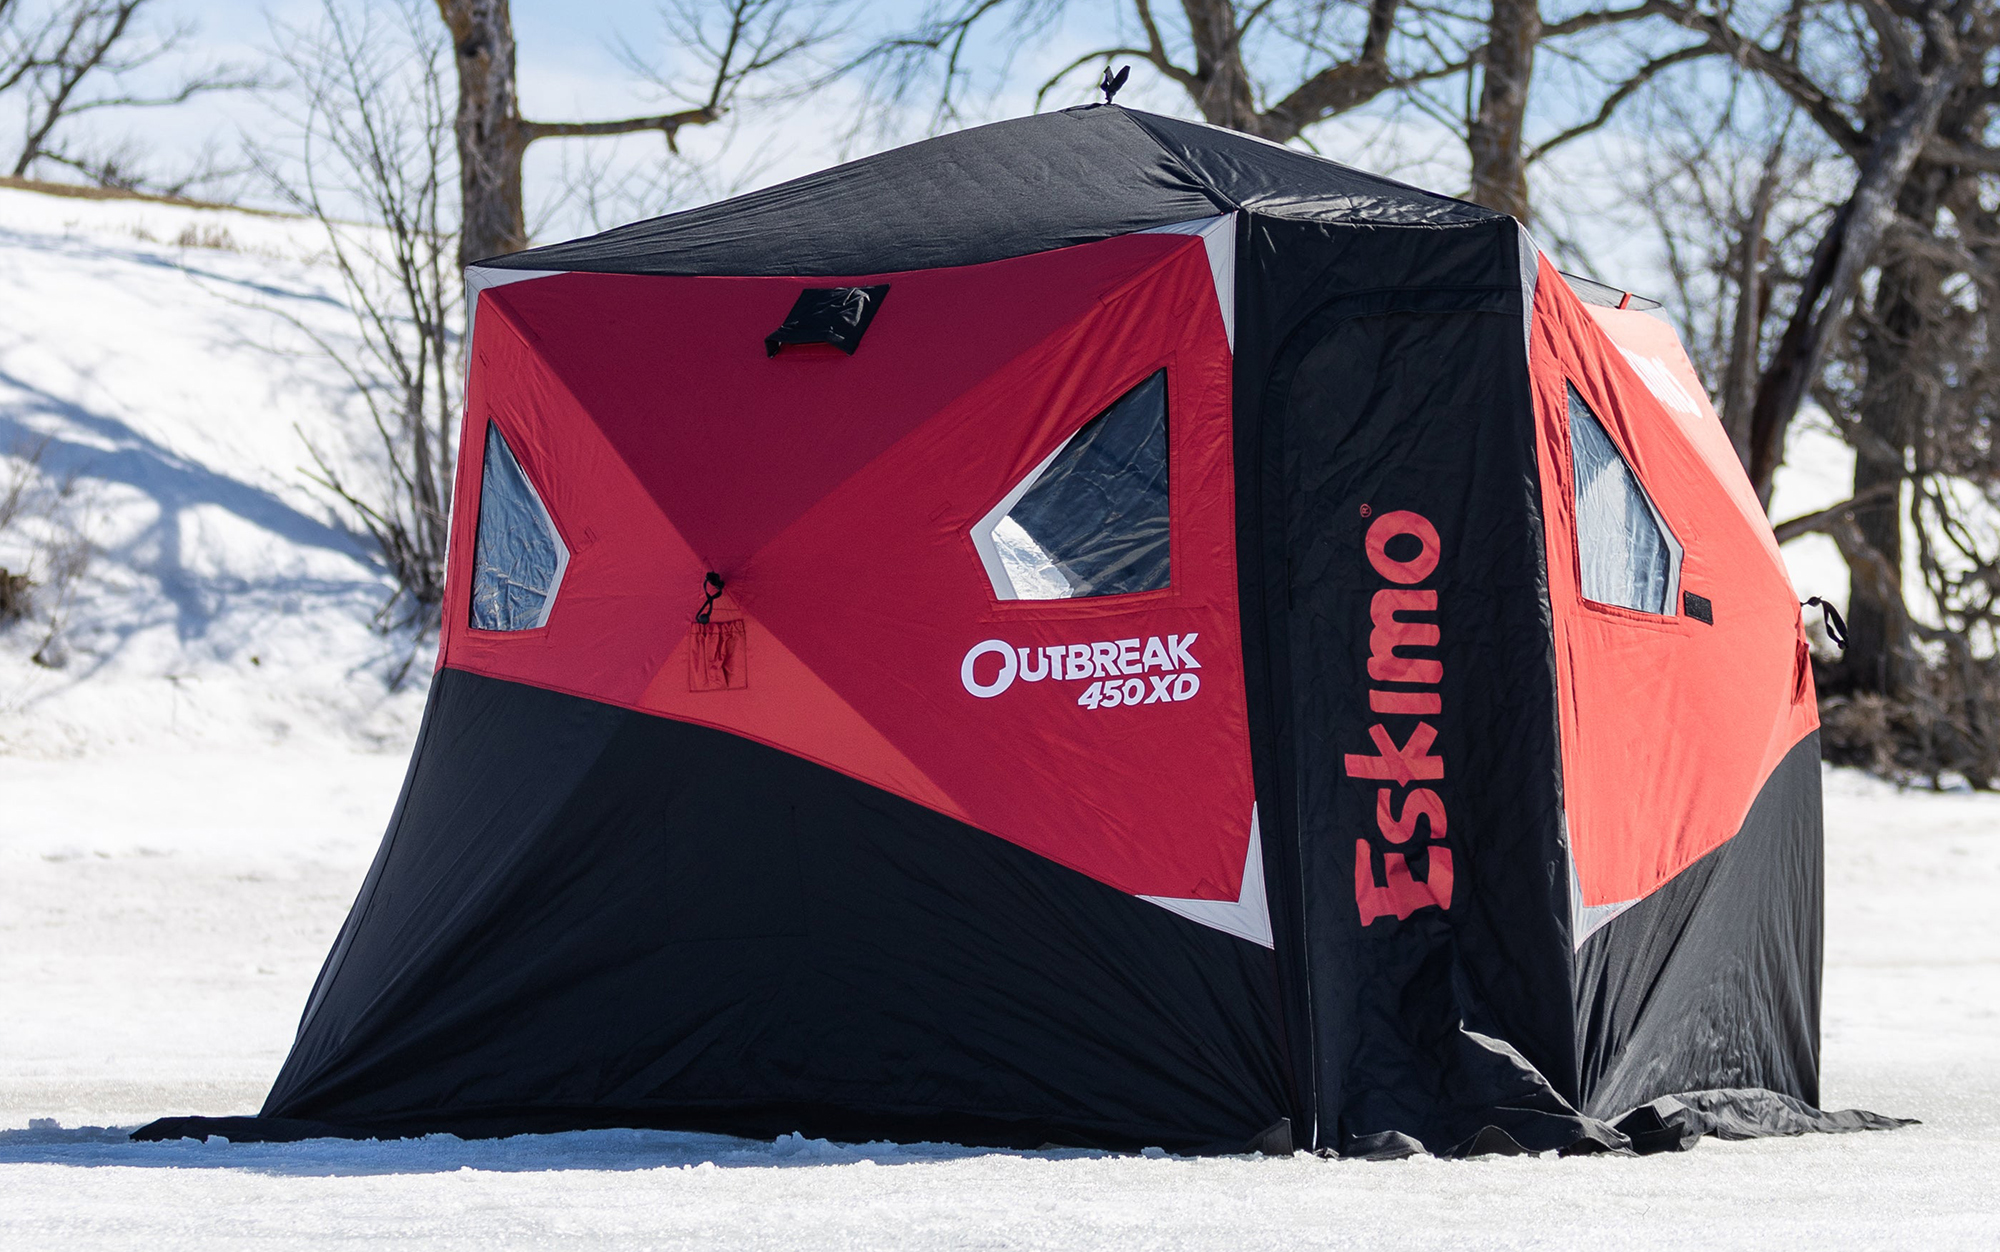 The Eskimo Outbreak 450XD is the best ice fishing shelter.